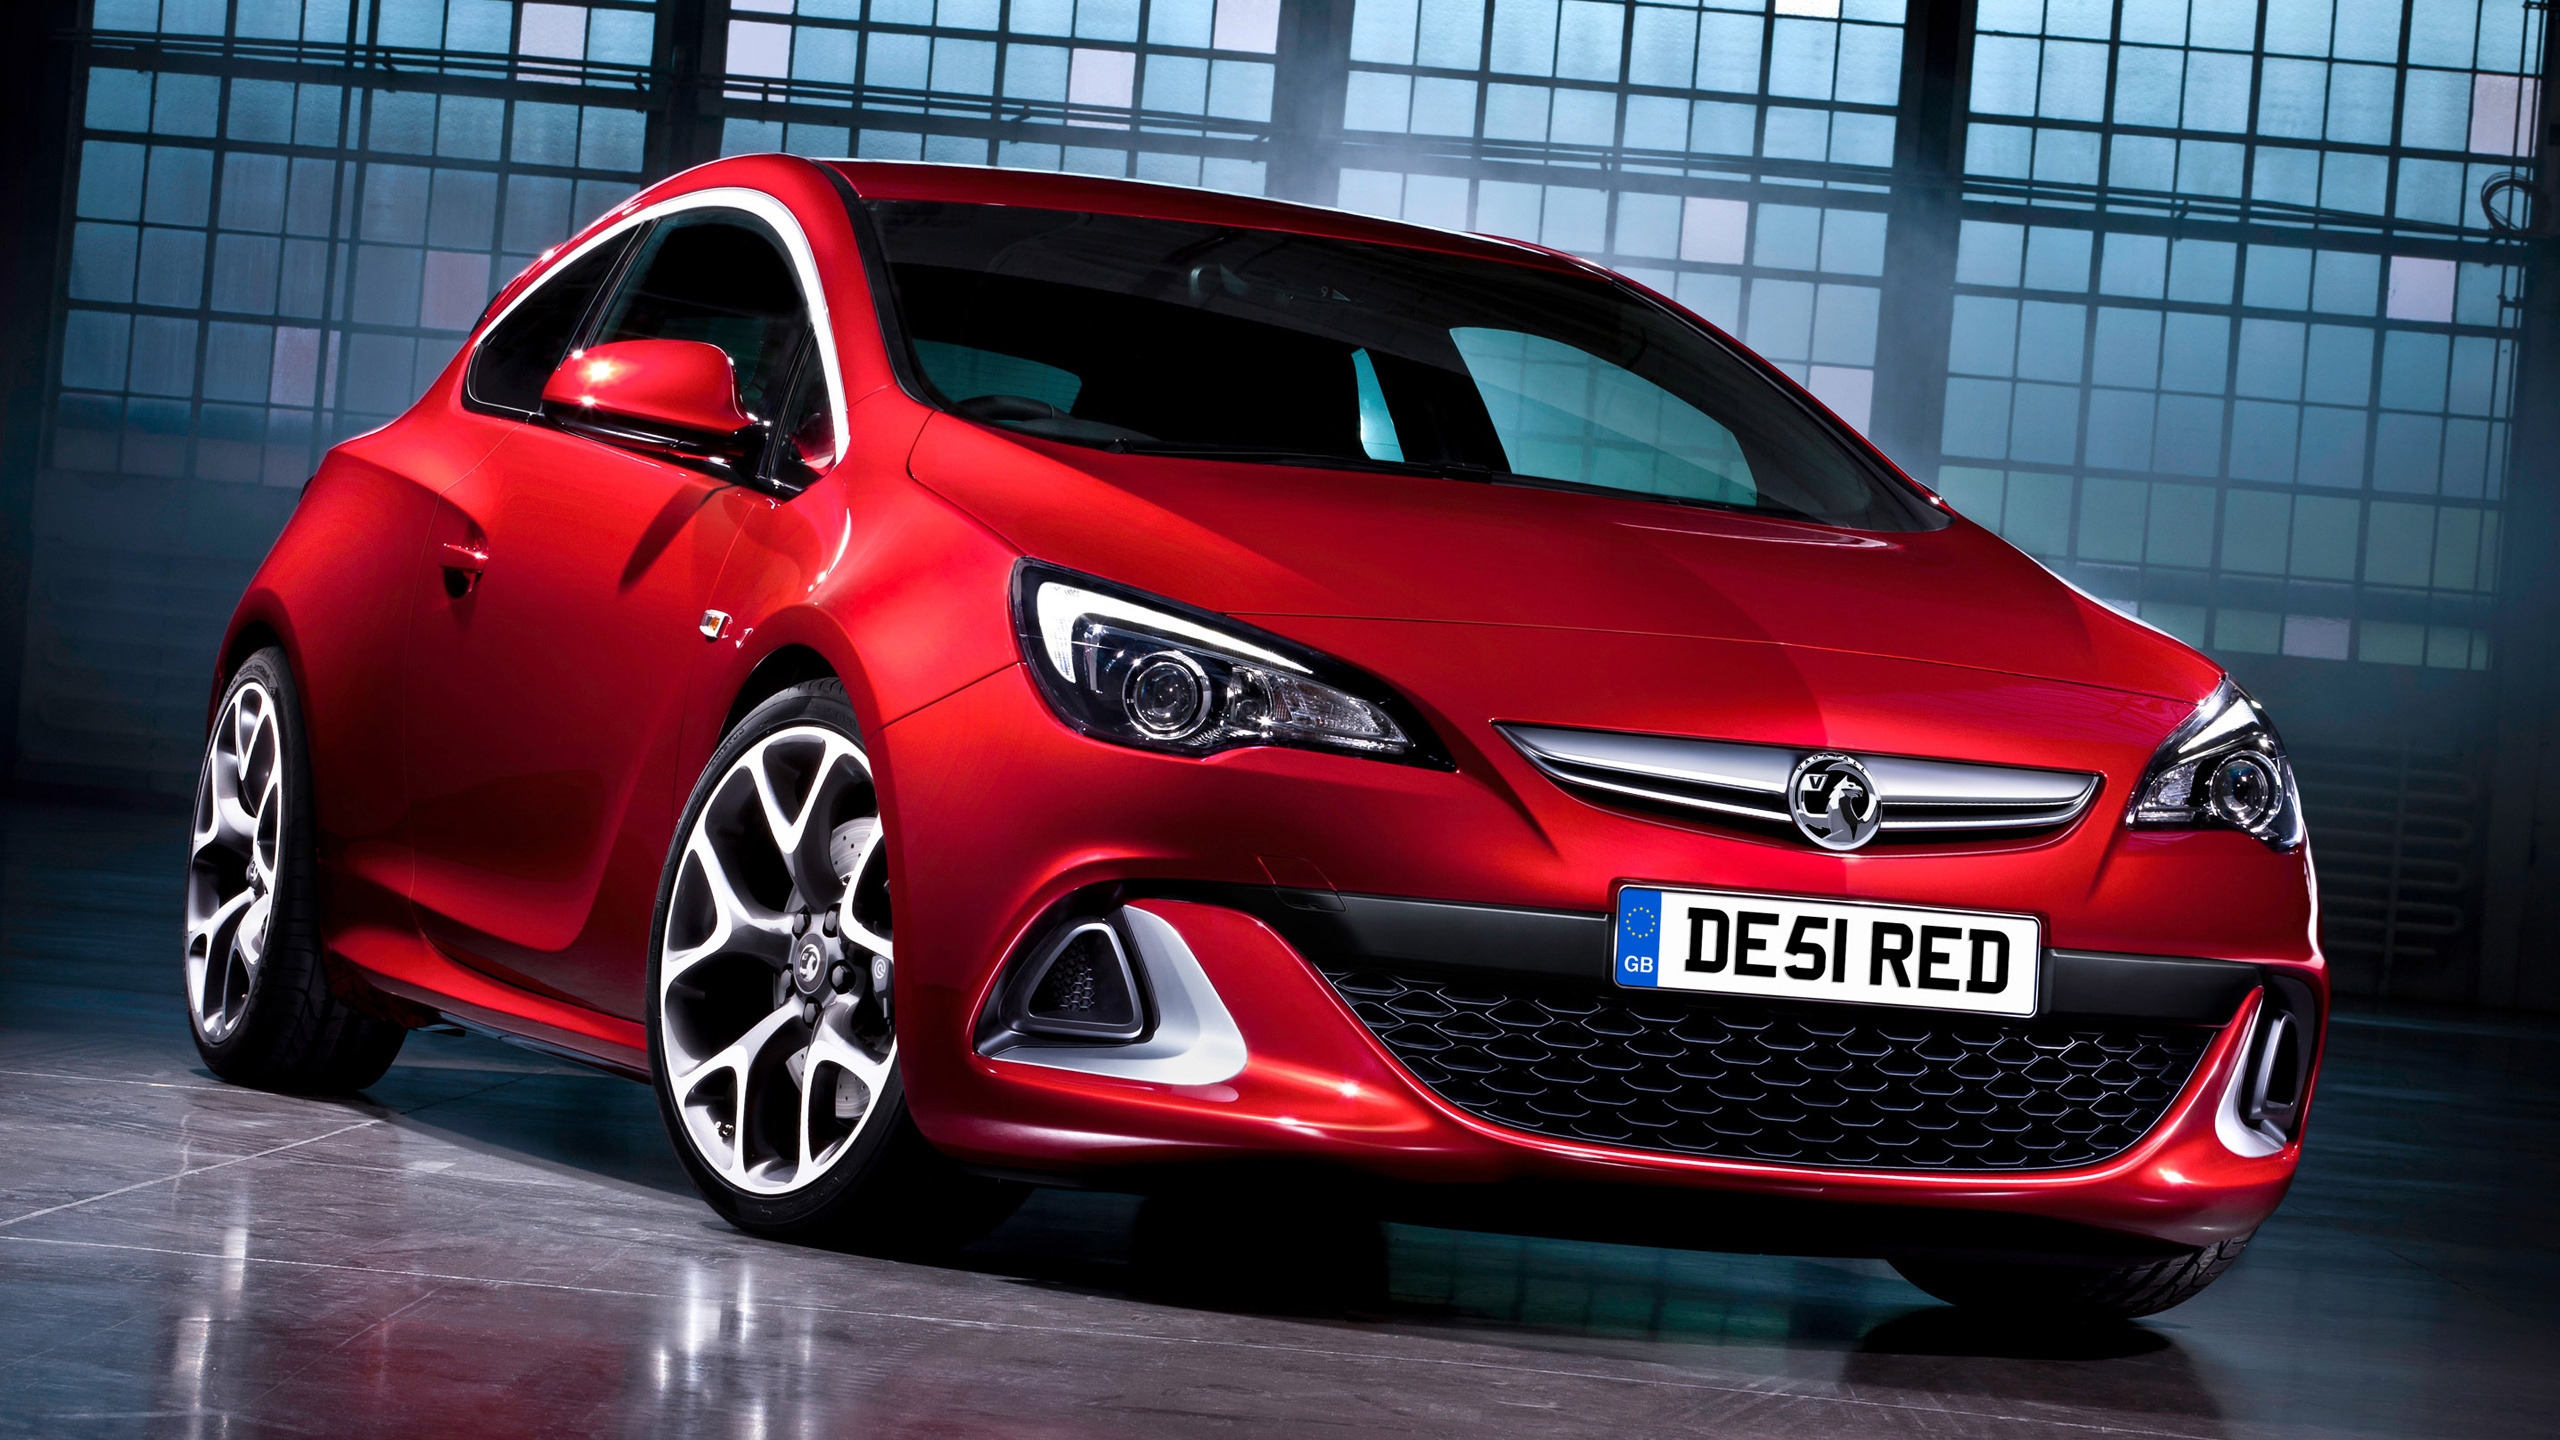 2012 Vauxhall Astra GTC for 2560x1440 HDTV resolution